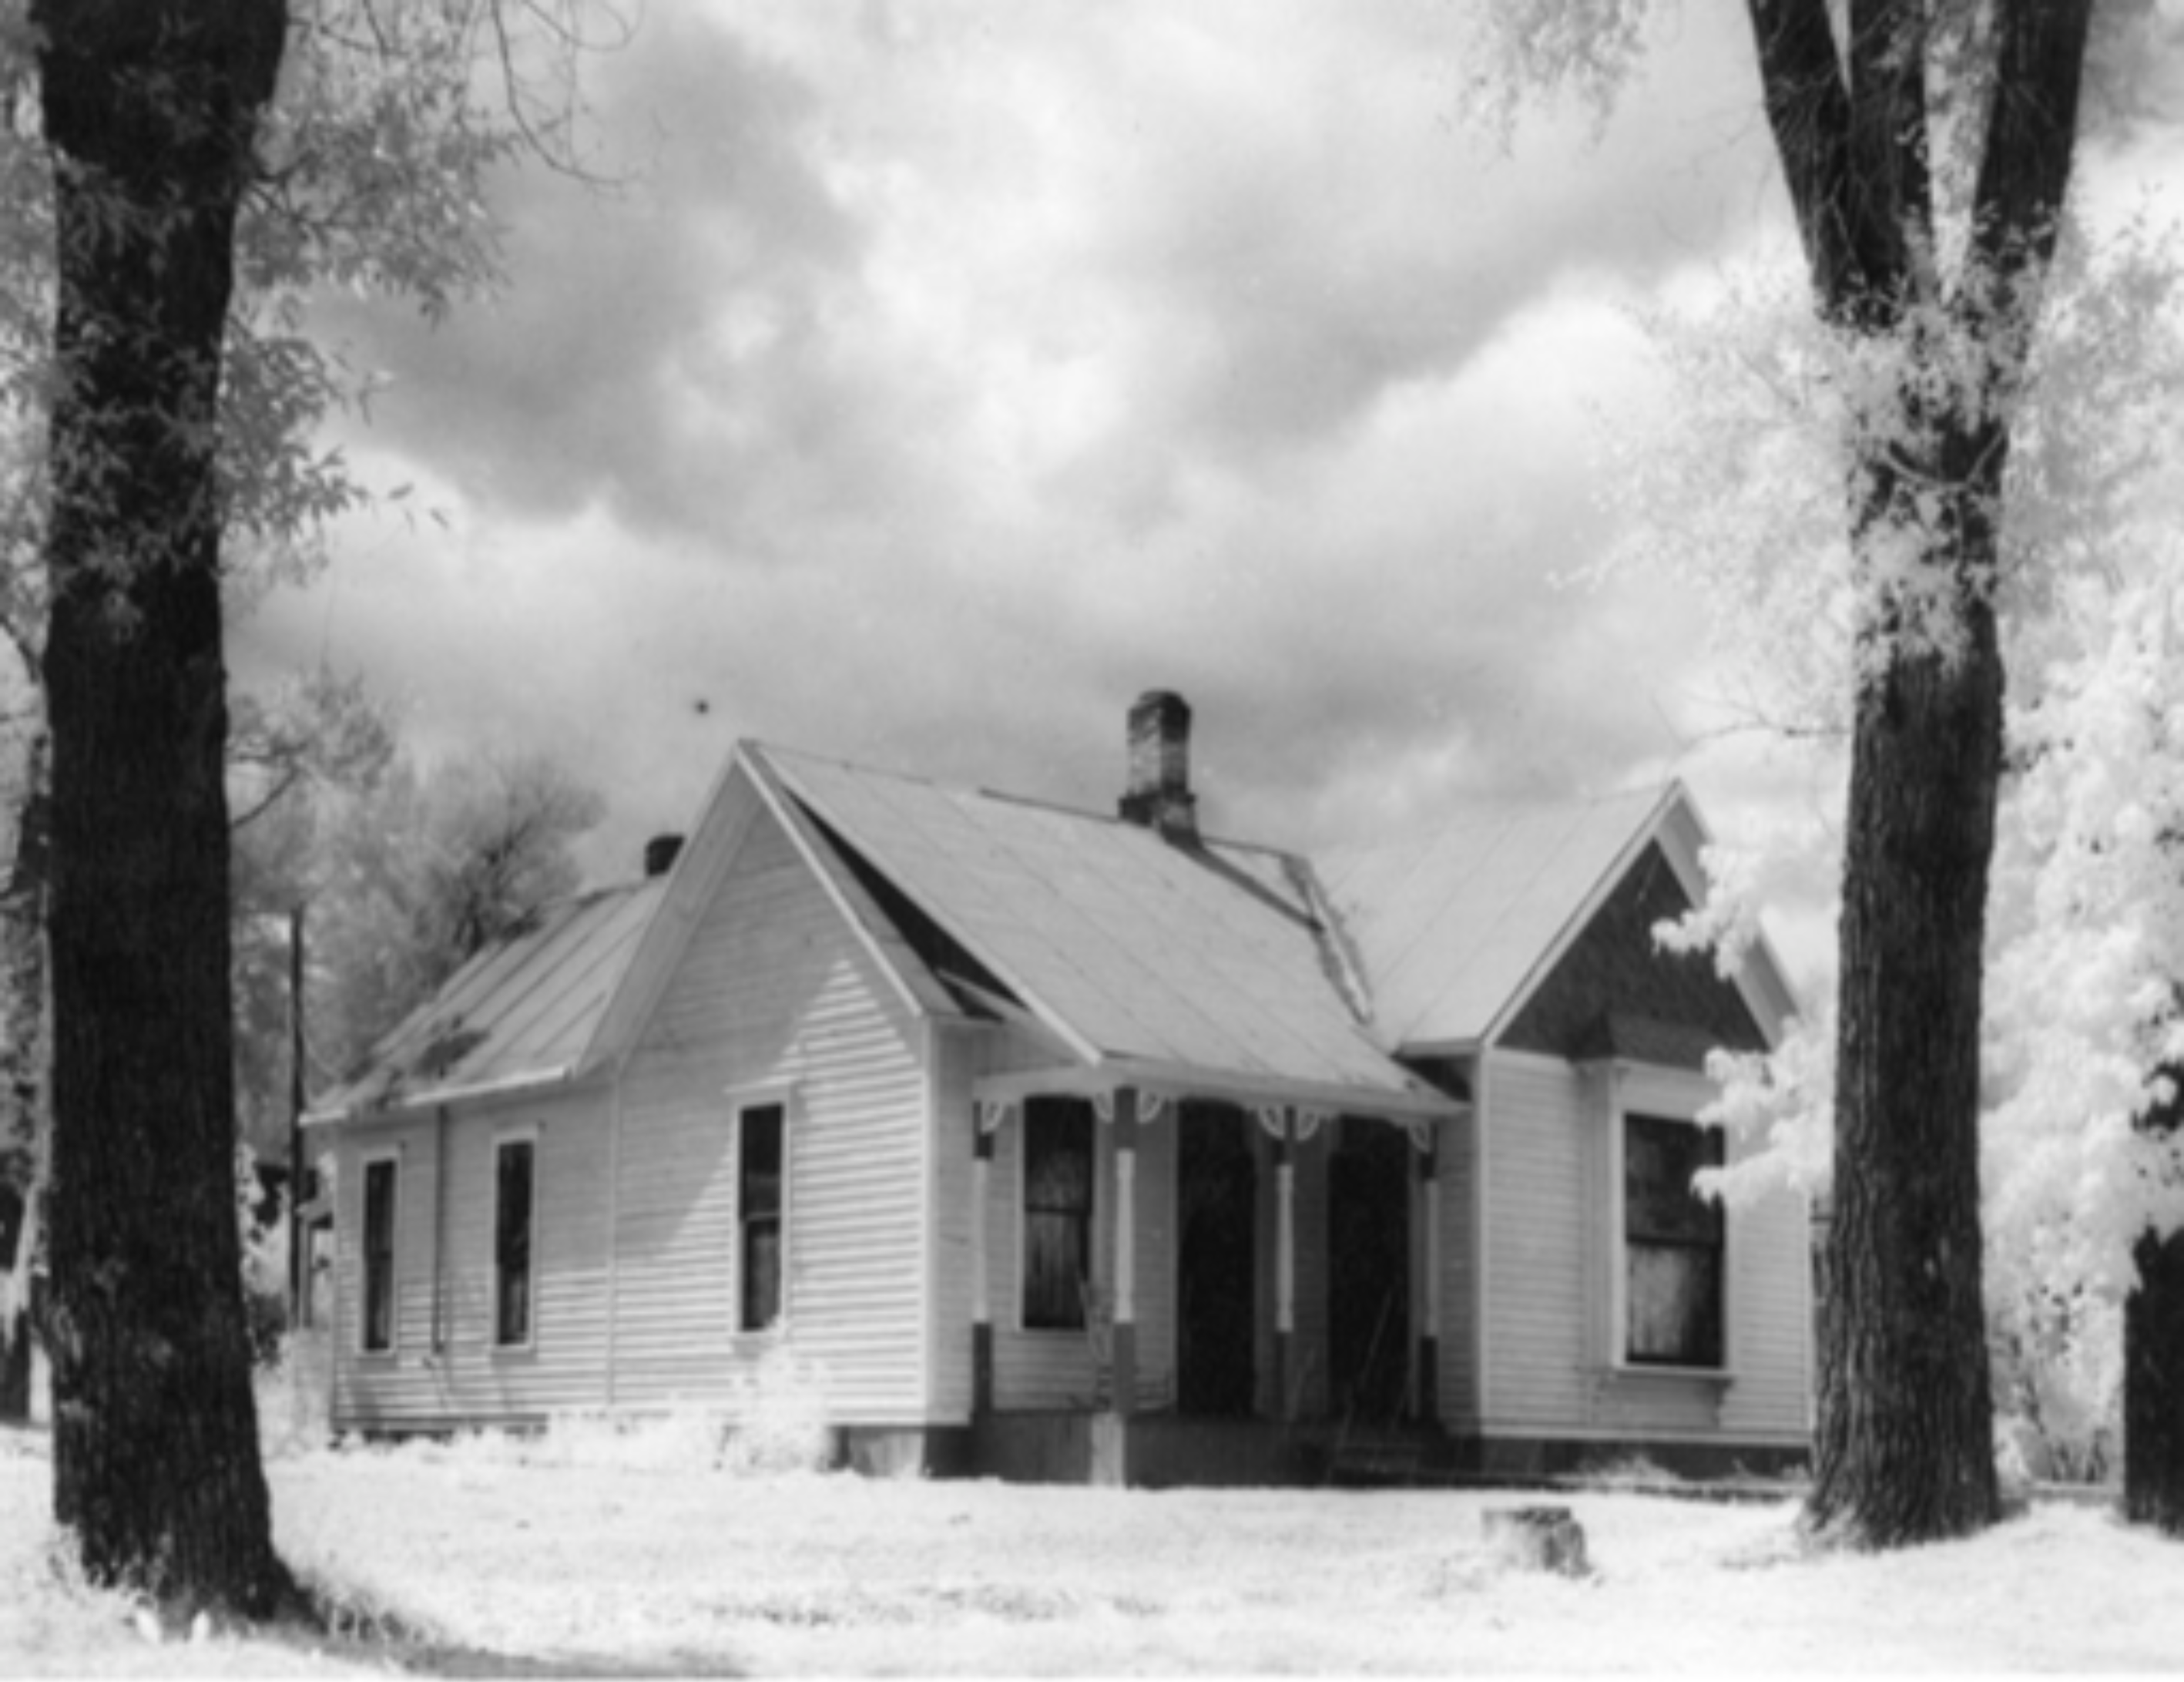 An old black and white photo of the exterior of the Smugglers Residence.